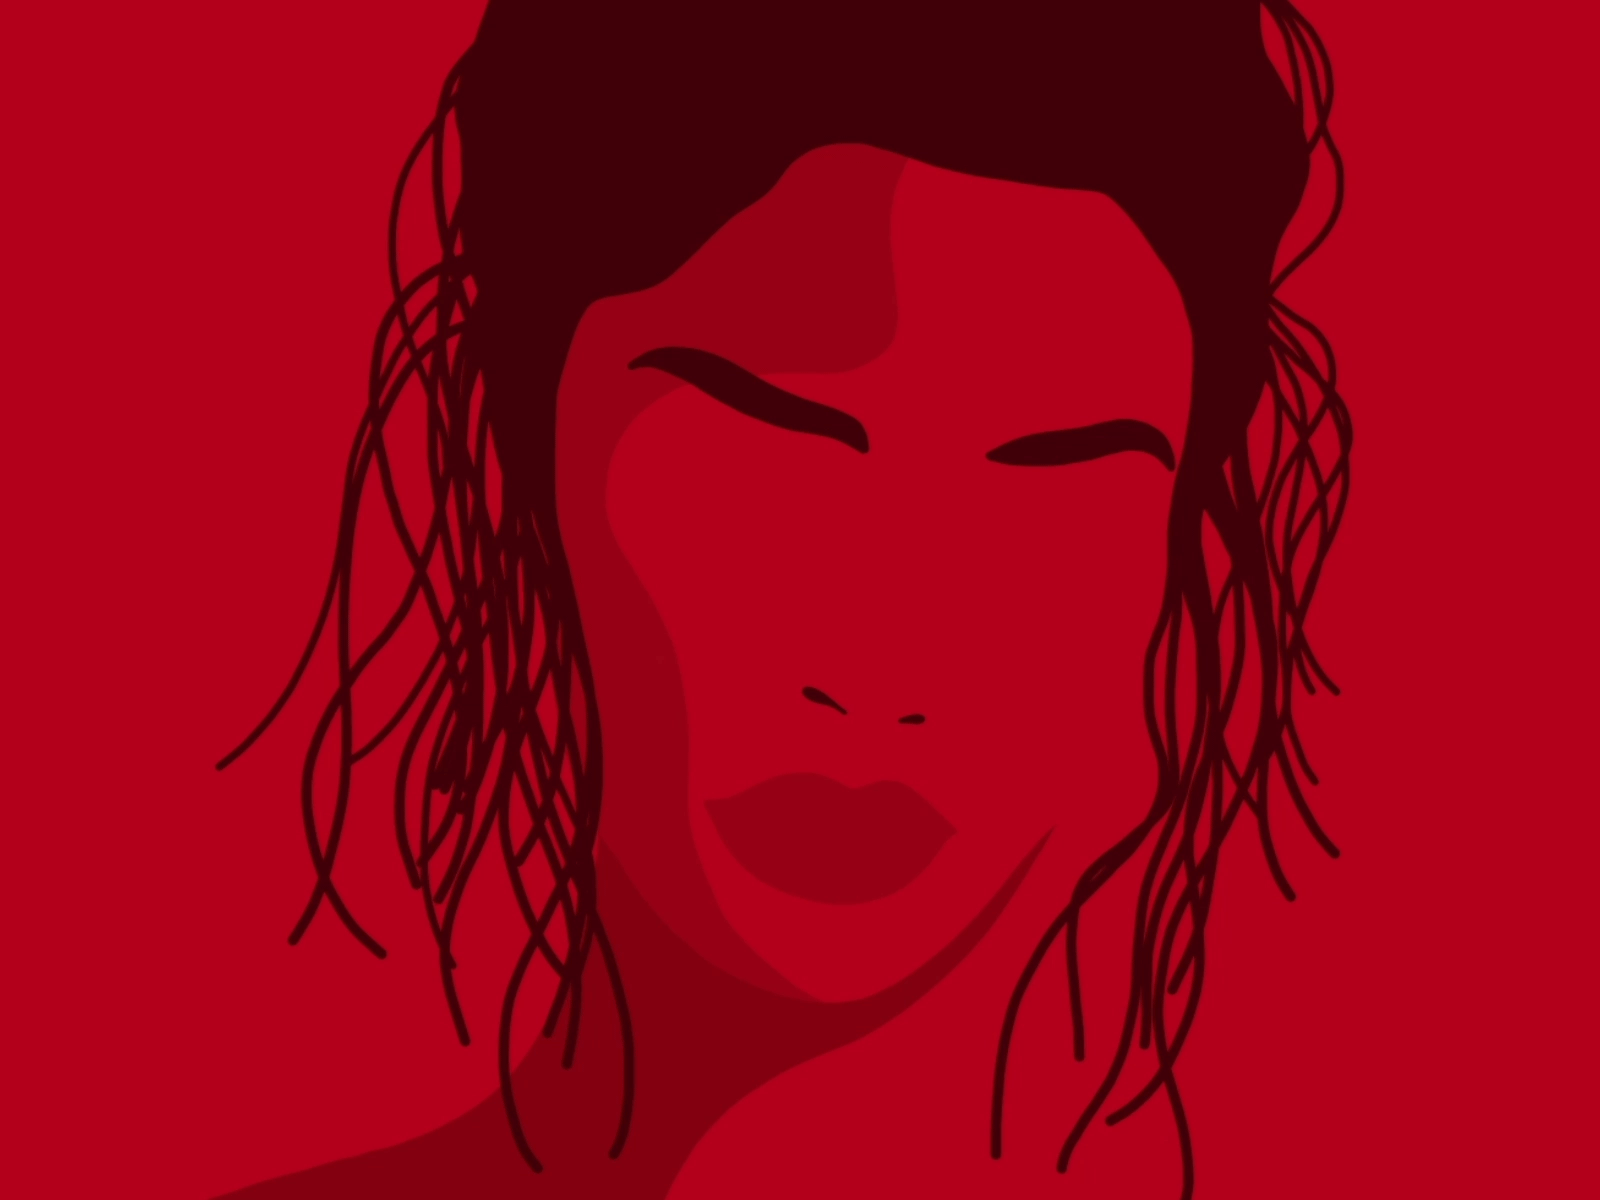 Seeing Red animation art colors design illustration illustration art minimal motiongraphics popart red rose simple simplistic woman